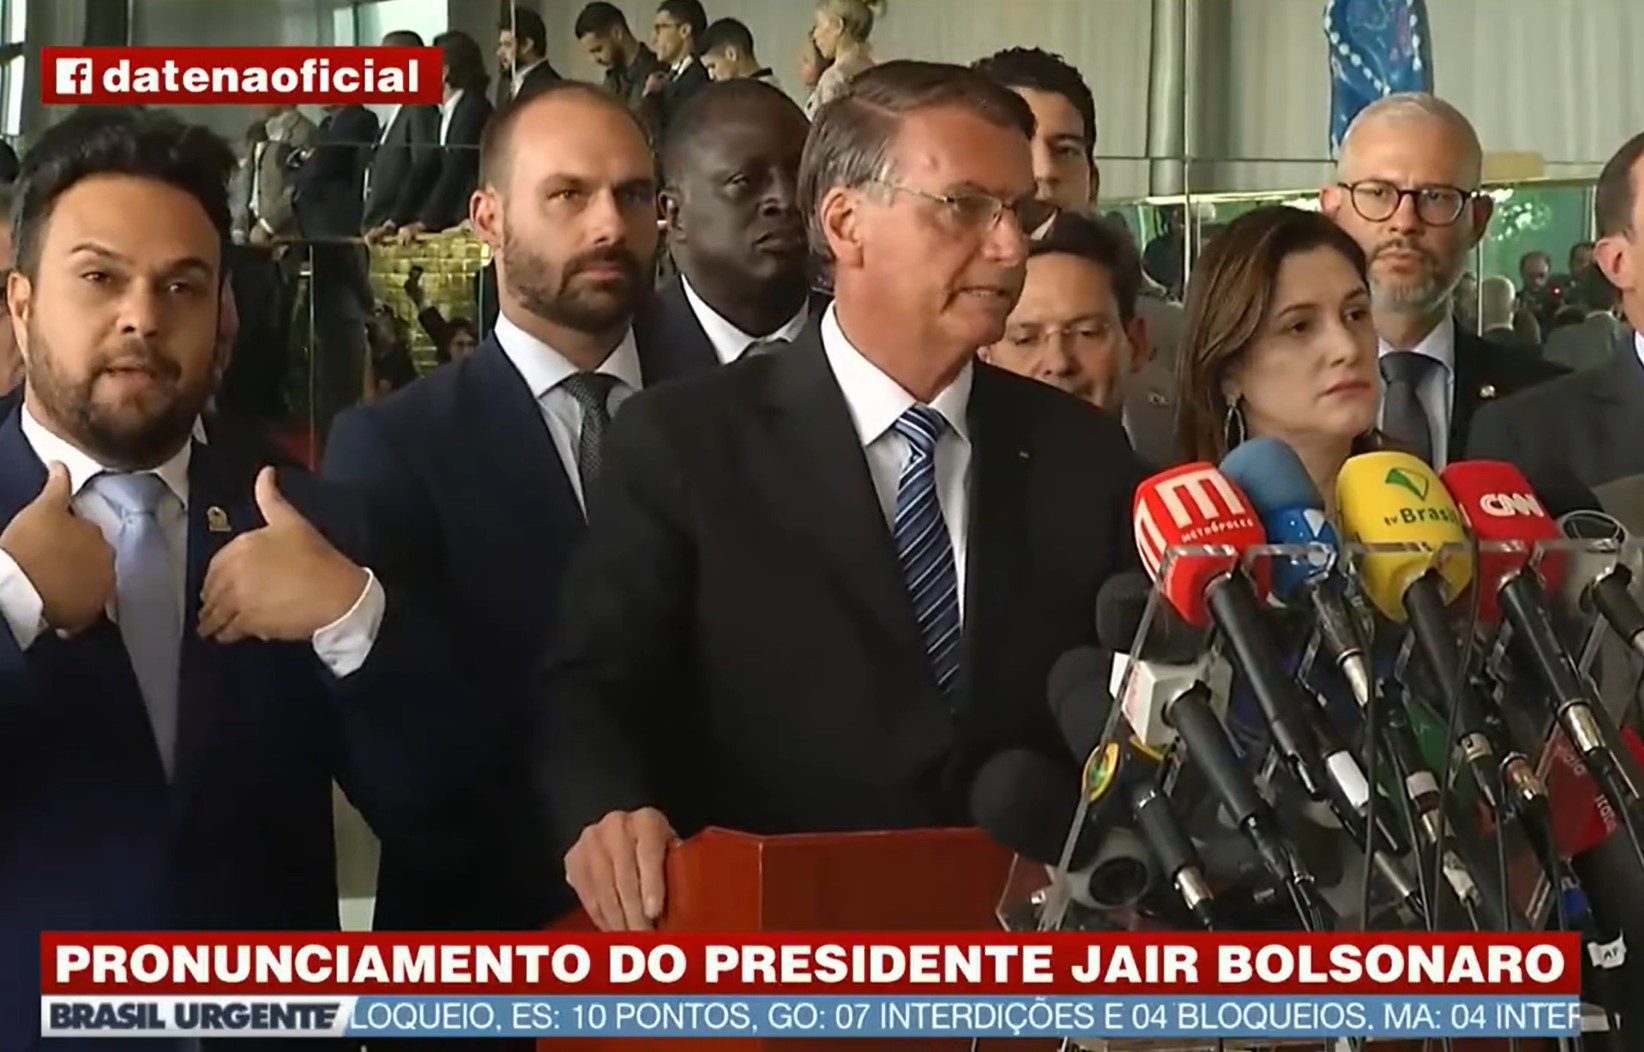 BREAKING: Brazilian President Jair Bolsonaro Refuses to Concede in Suspicious Election – Supporters CHEER in the Street!